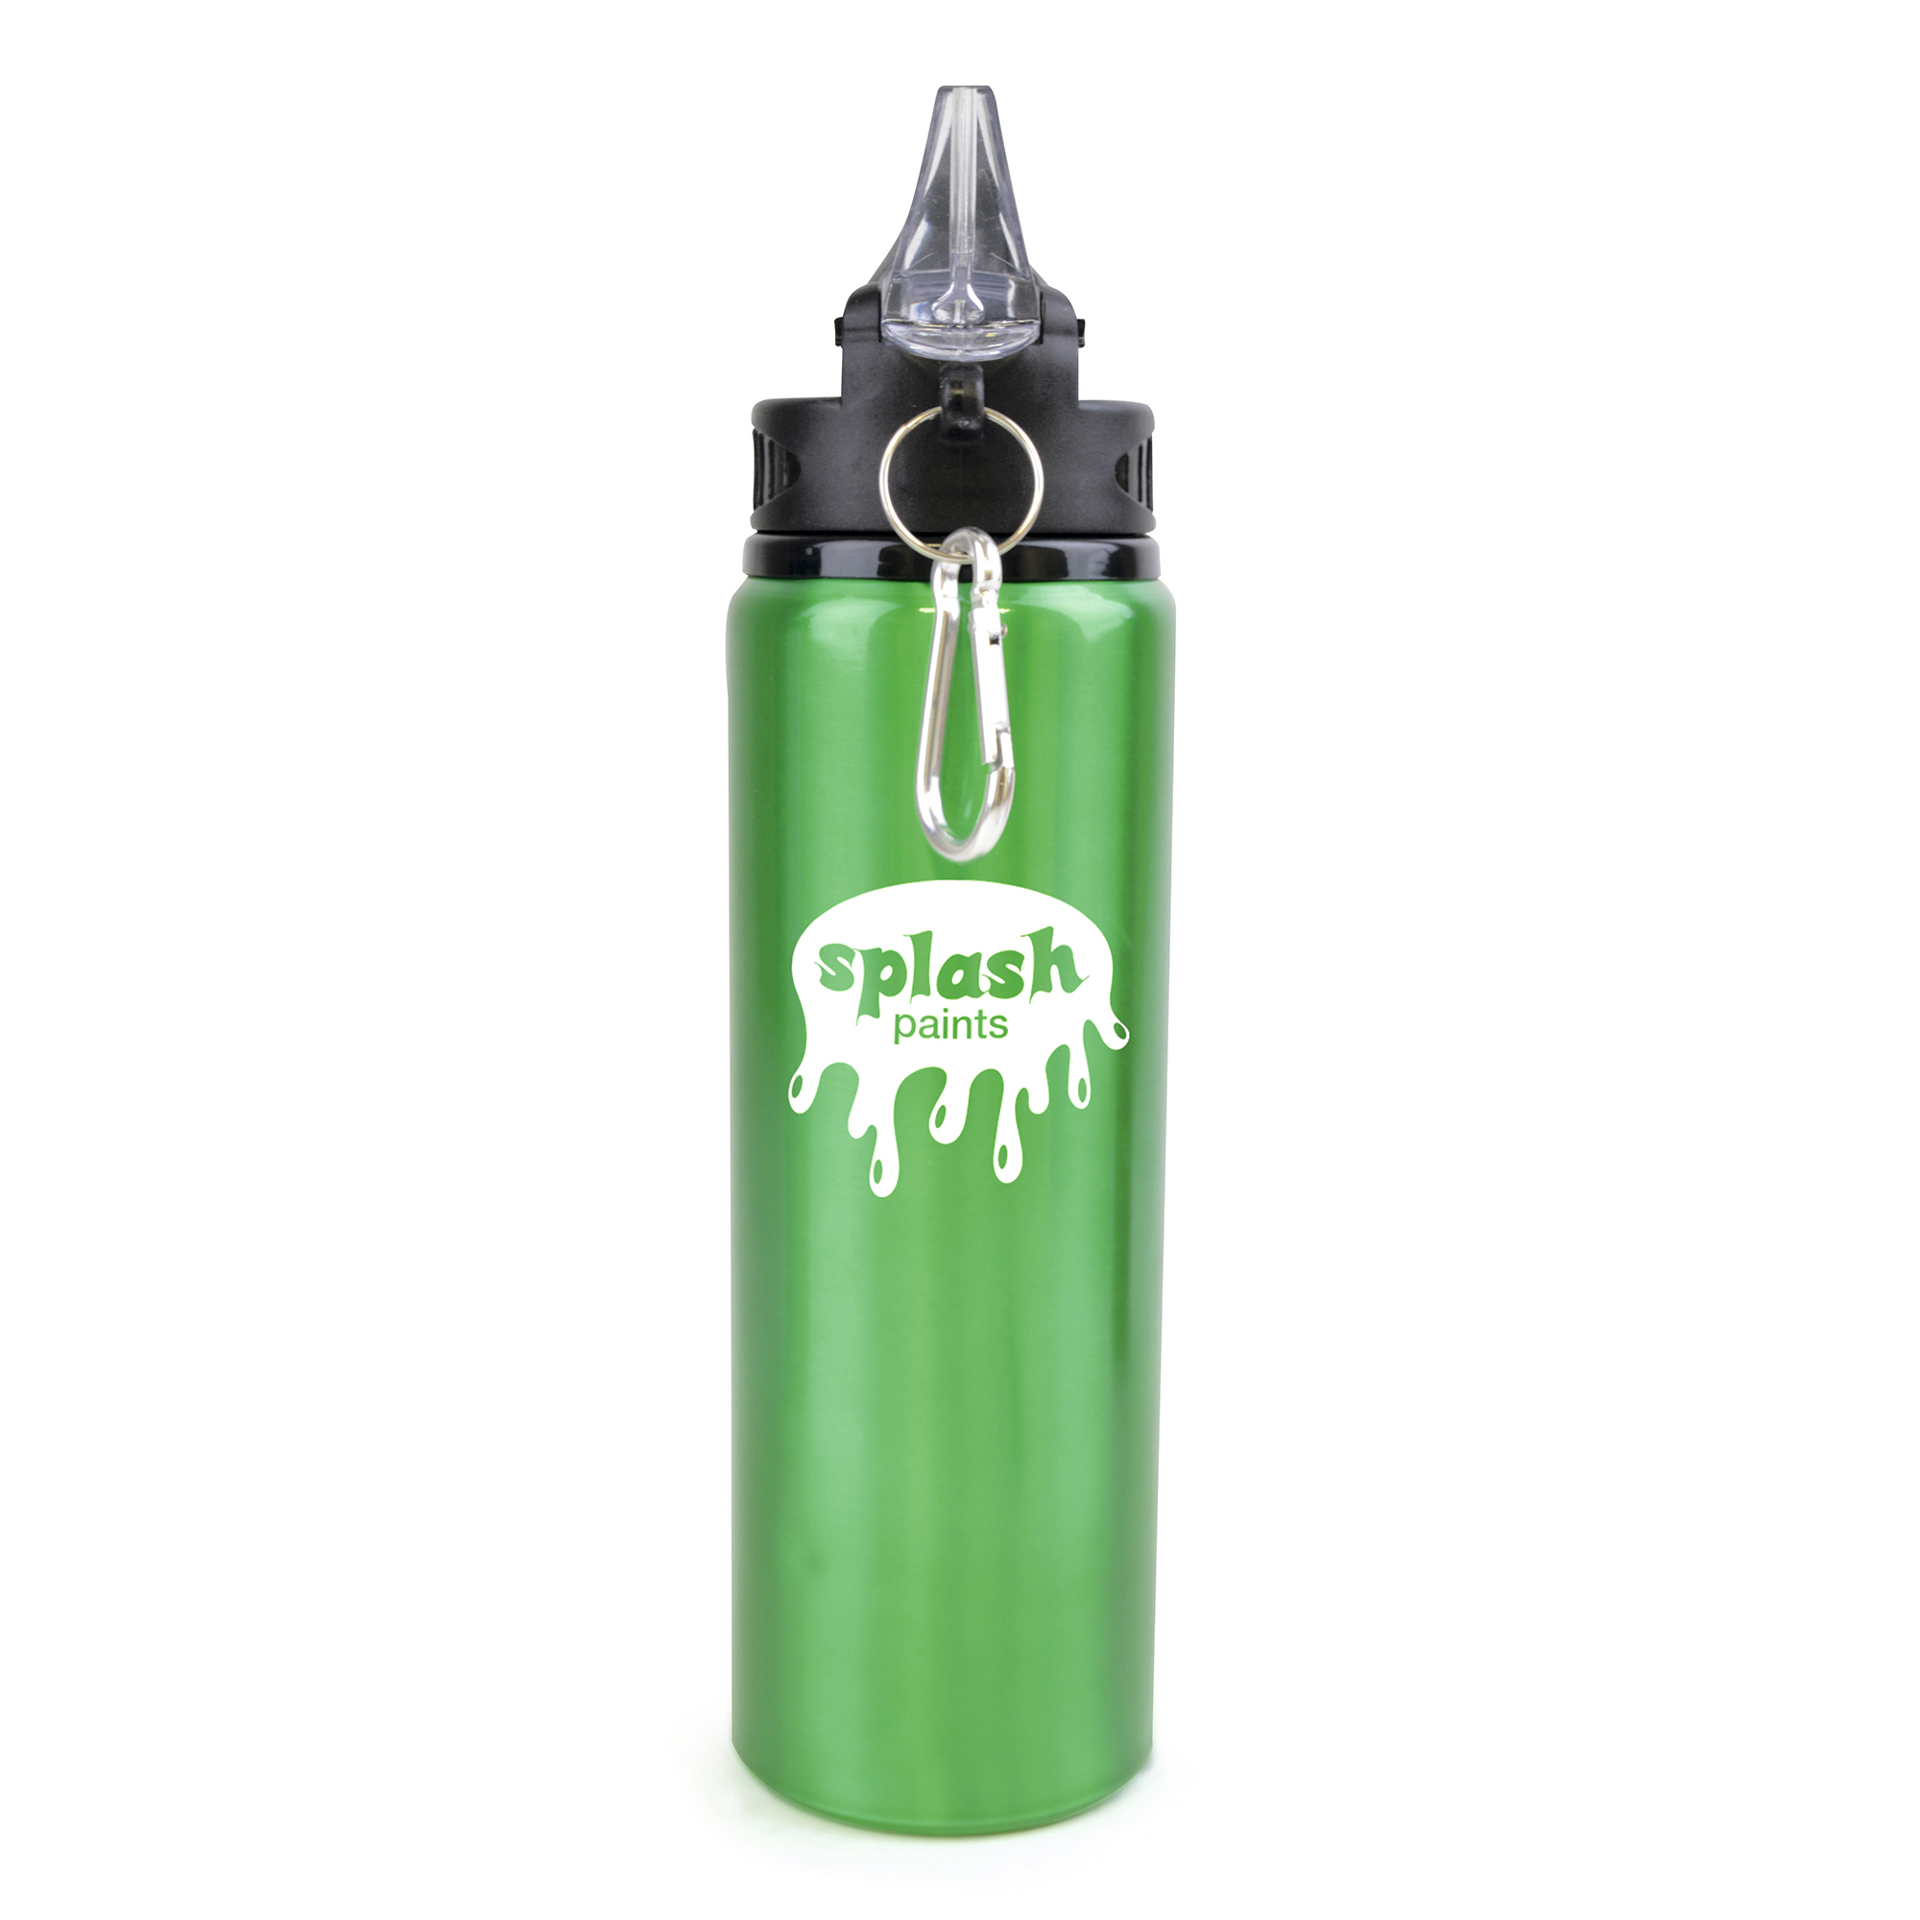 Green promotional drinks bottle with company logo printed on the front